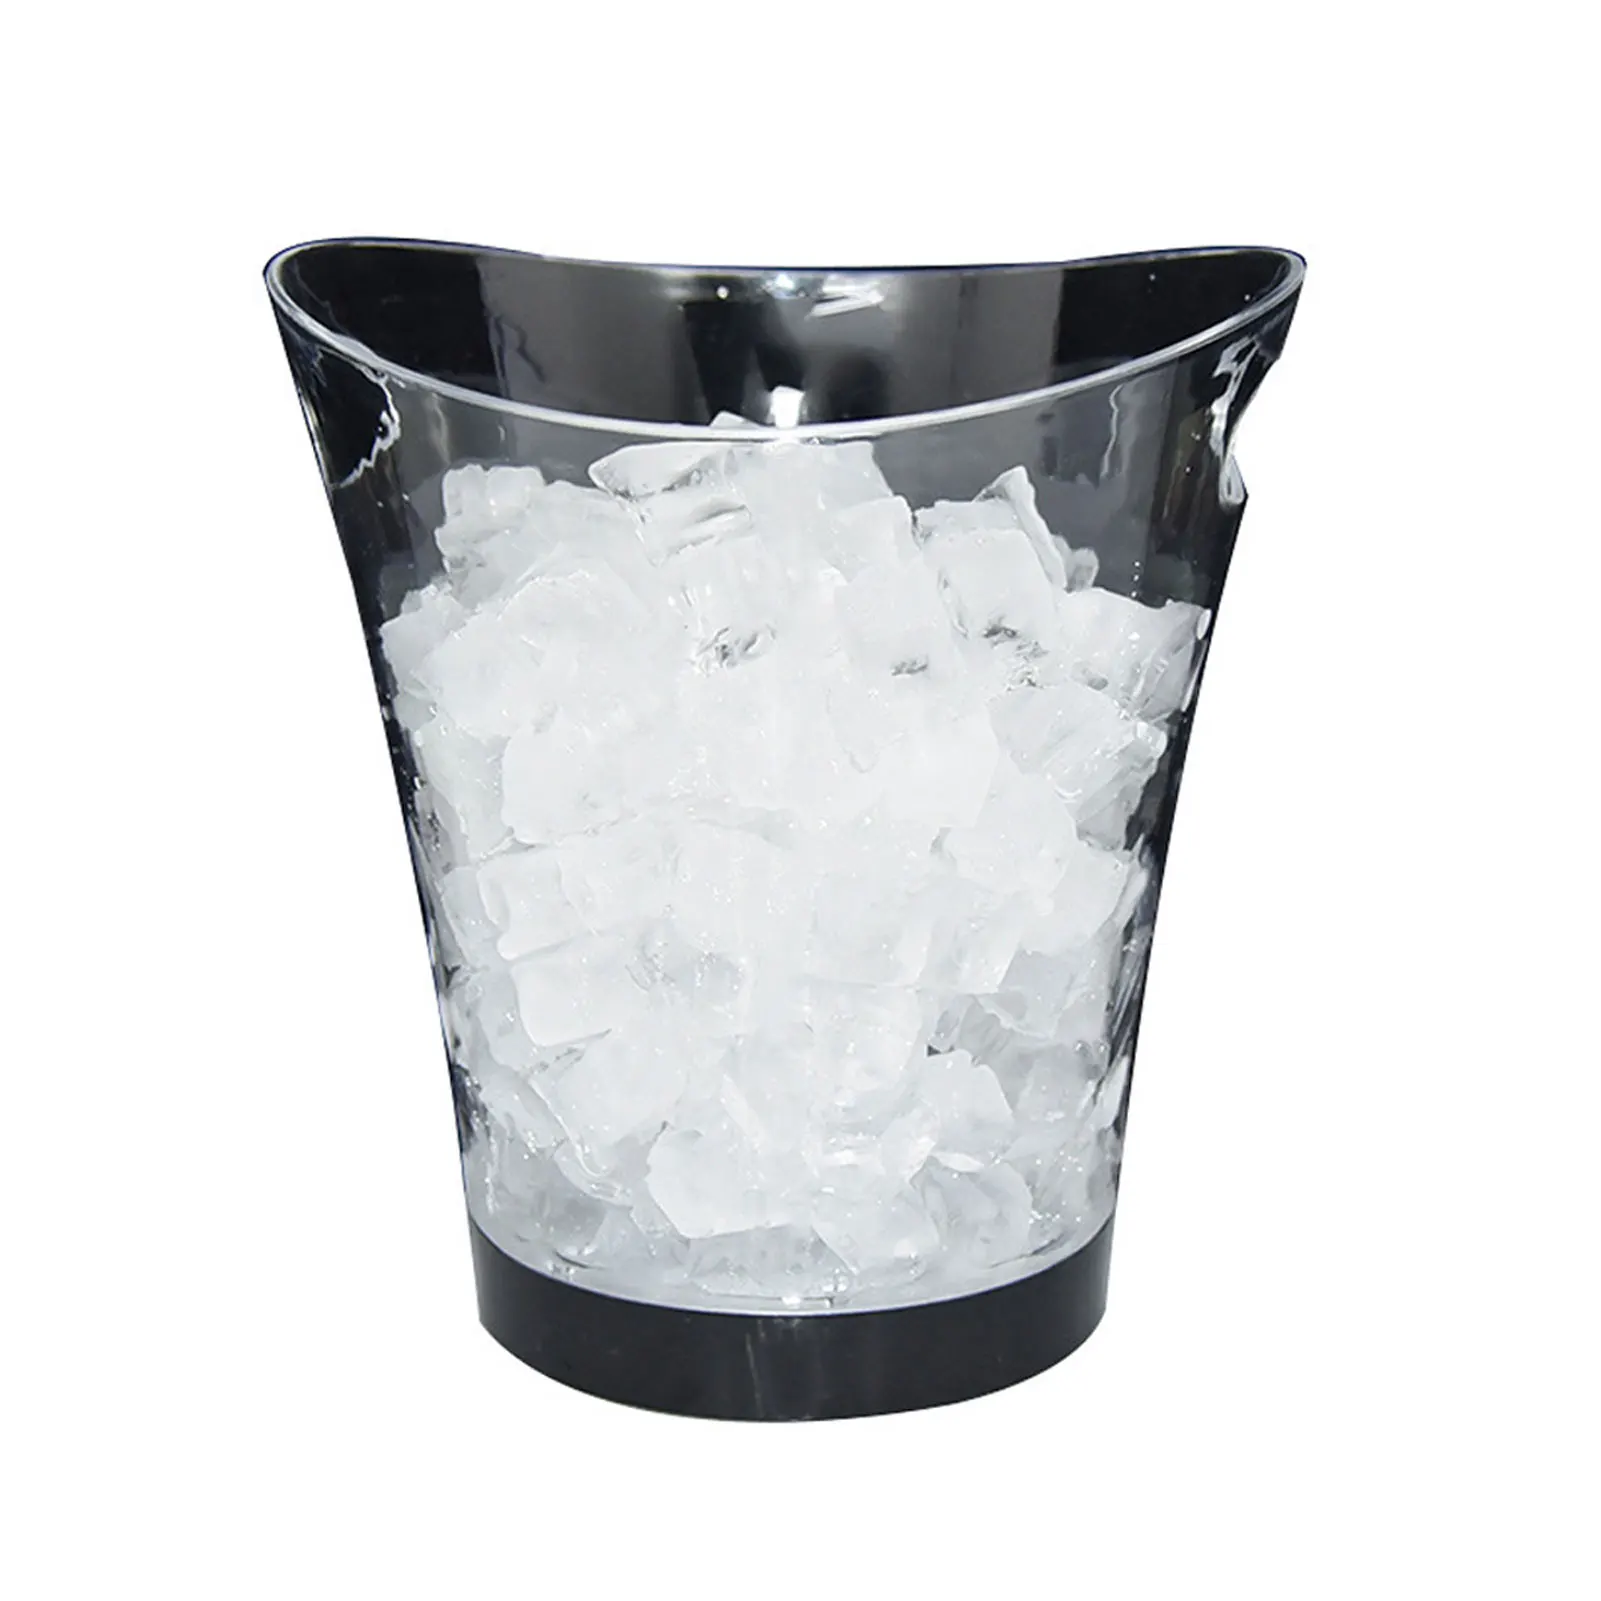 

Plastic Luminous Ice Bucket Large Capacity Waterproof Colorful Ice Bucket for Bar Resturant Club Home Party